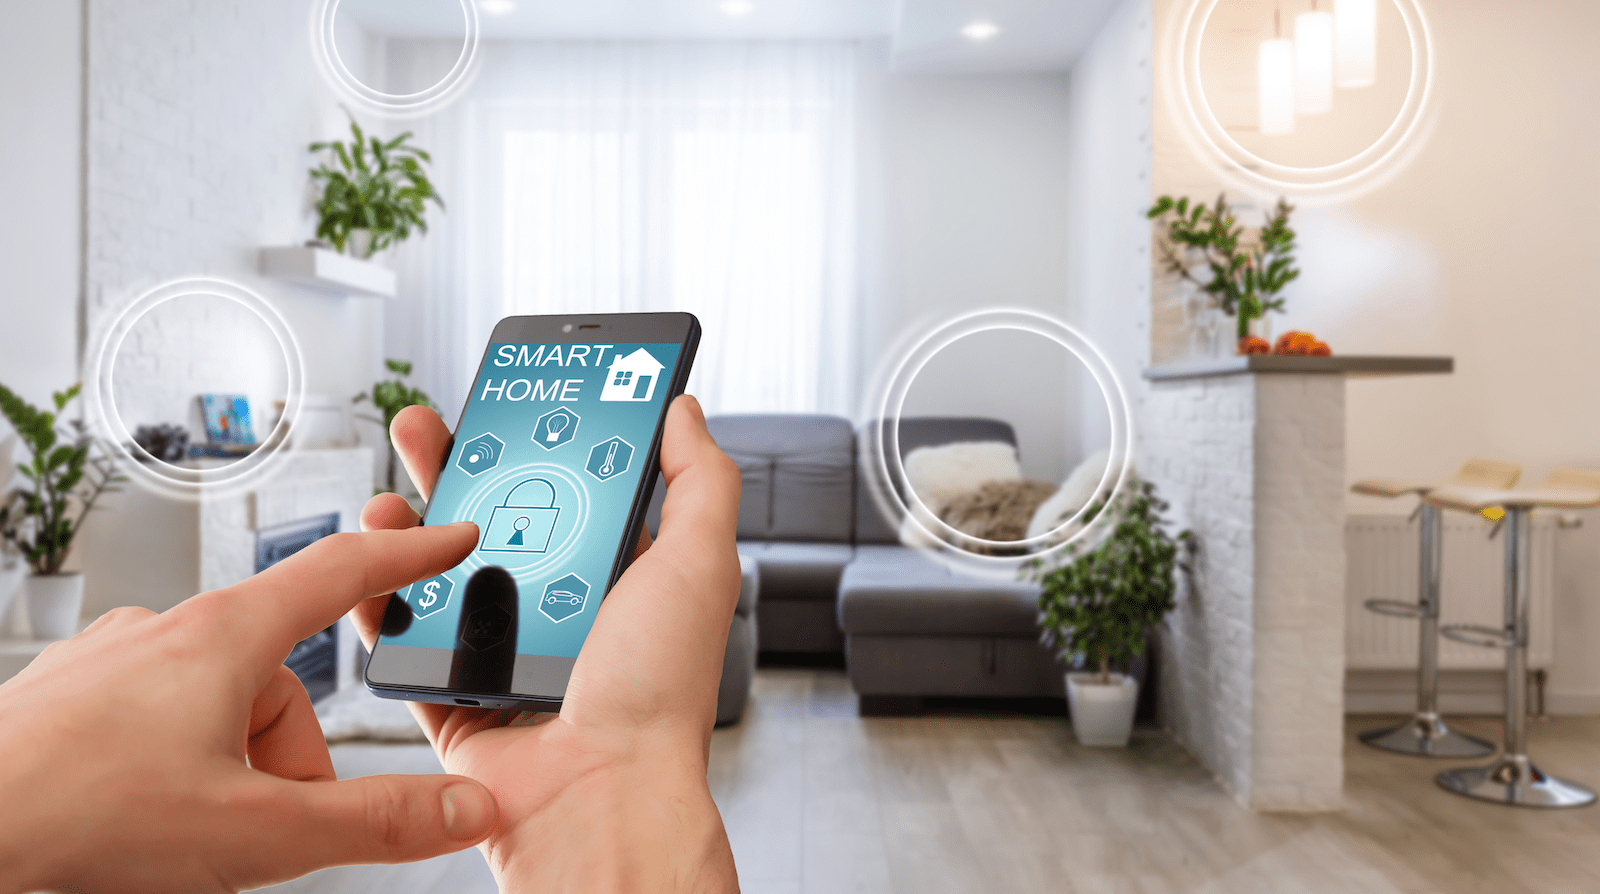 Smart home technology and systems controlled by homeowner